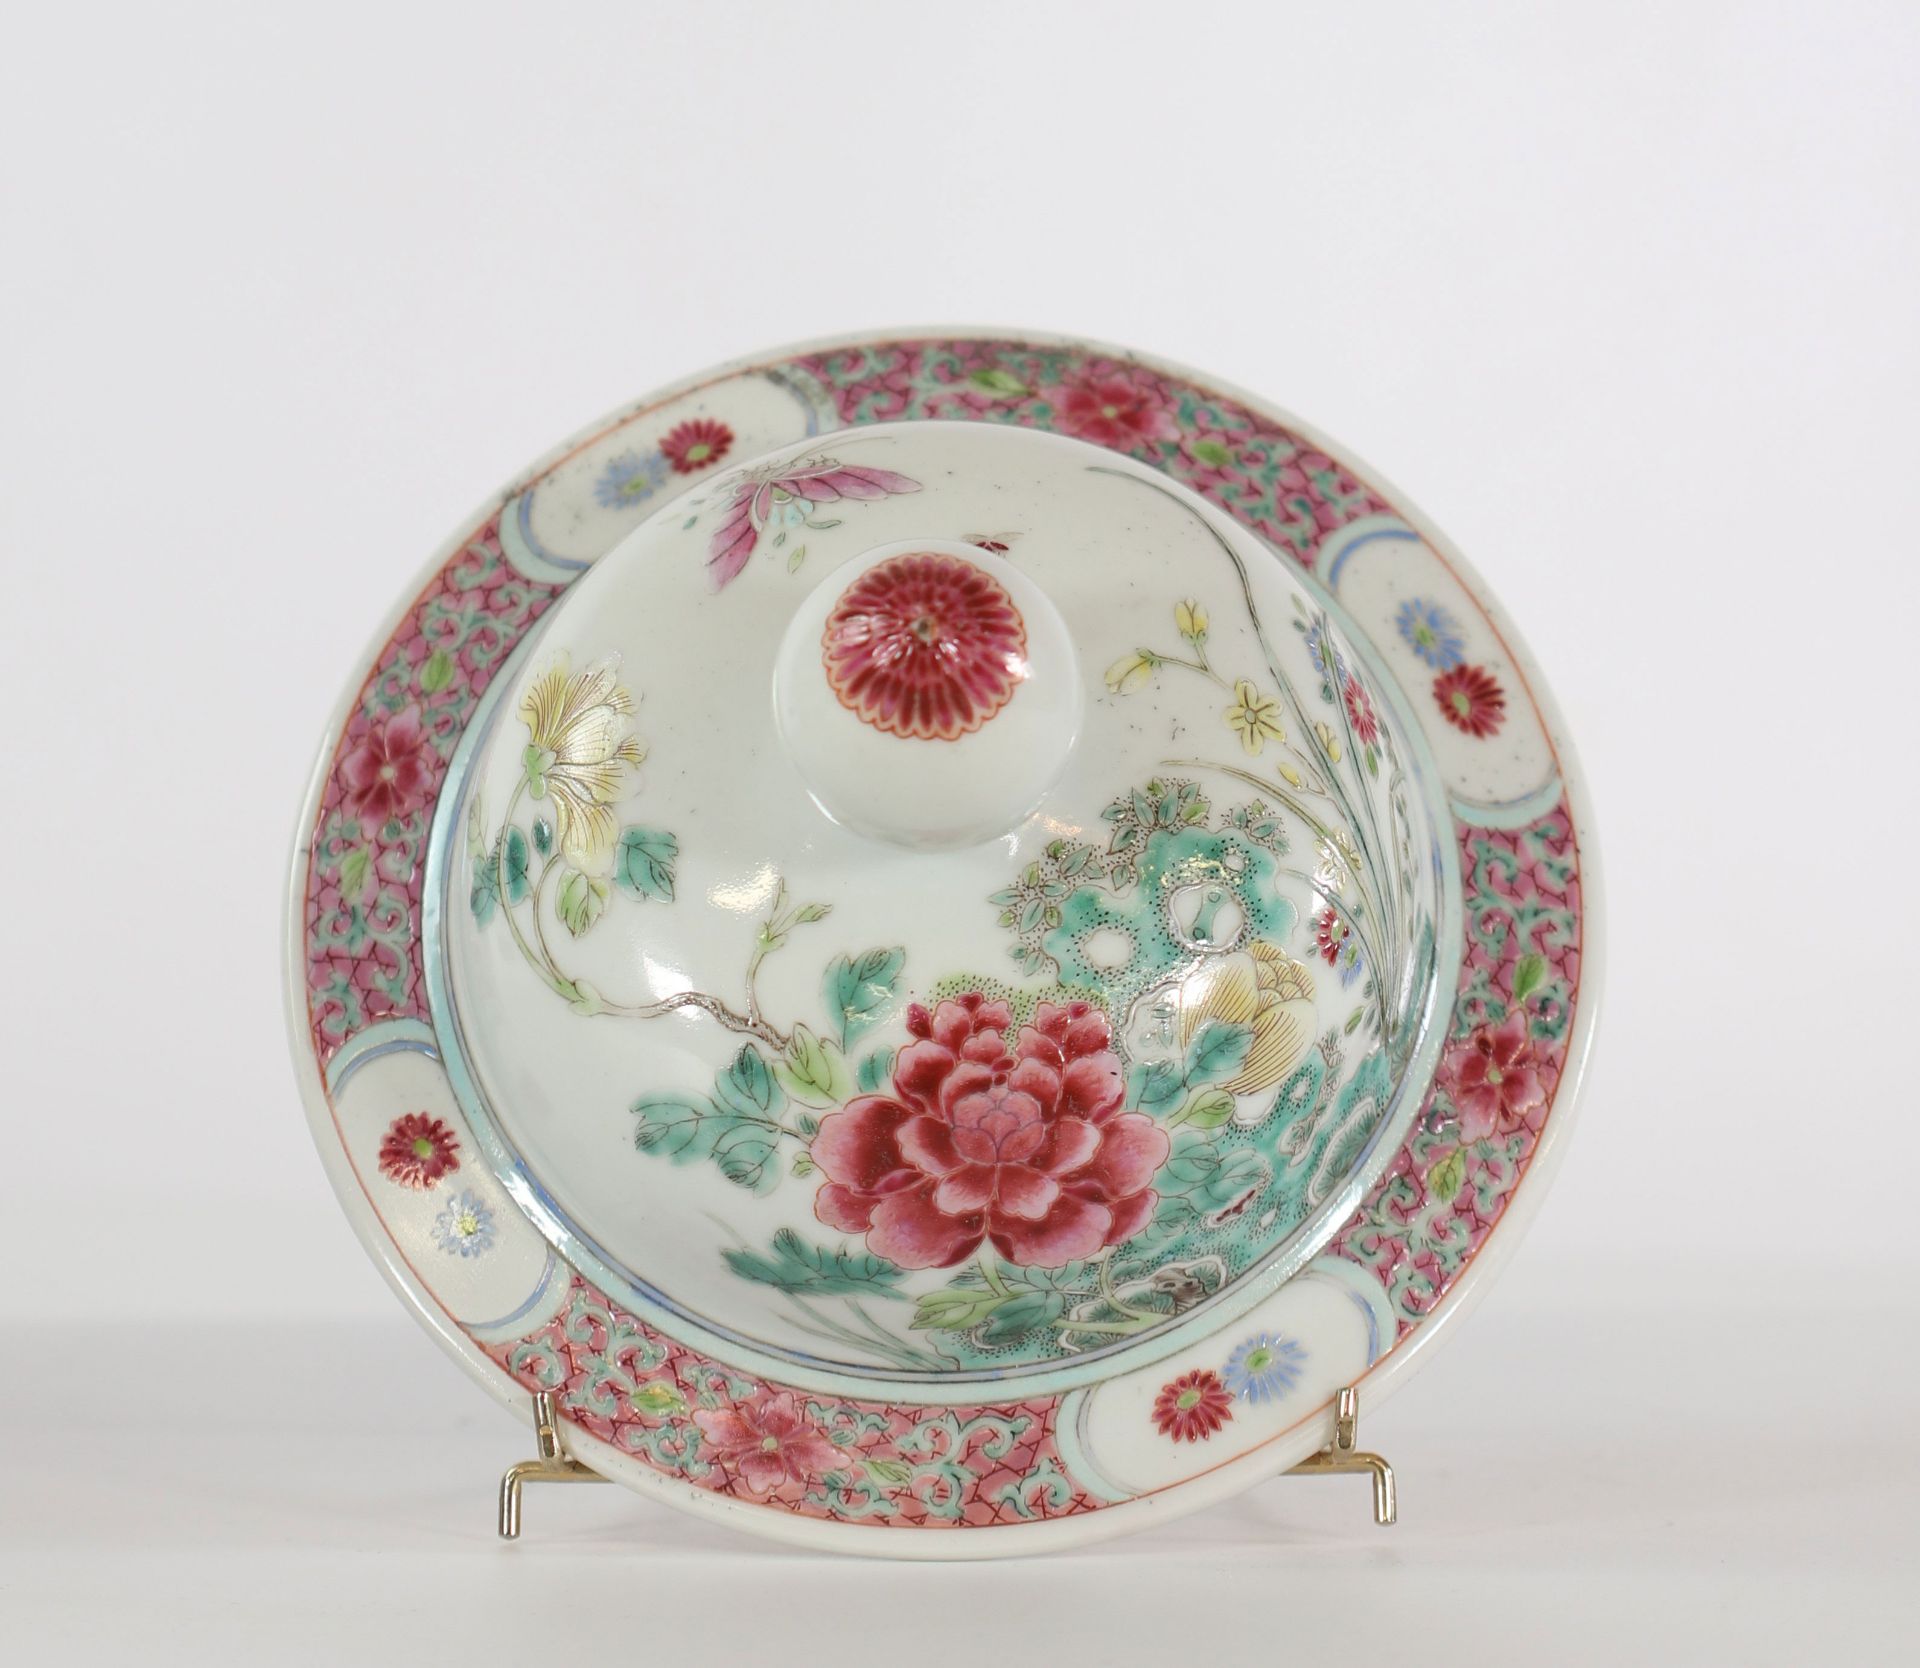 China covered vase famille rose decor of birds and flowers mark under the piece - Image 6 of 7